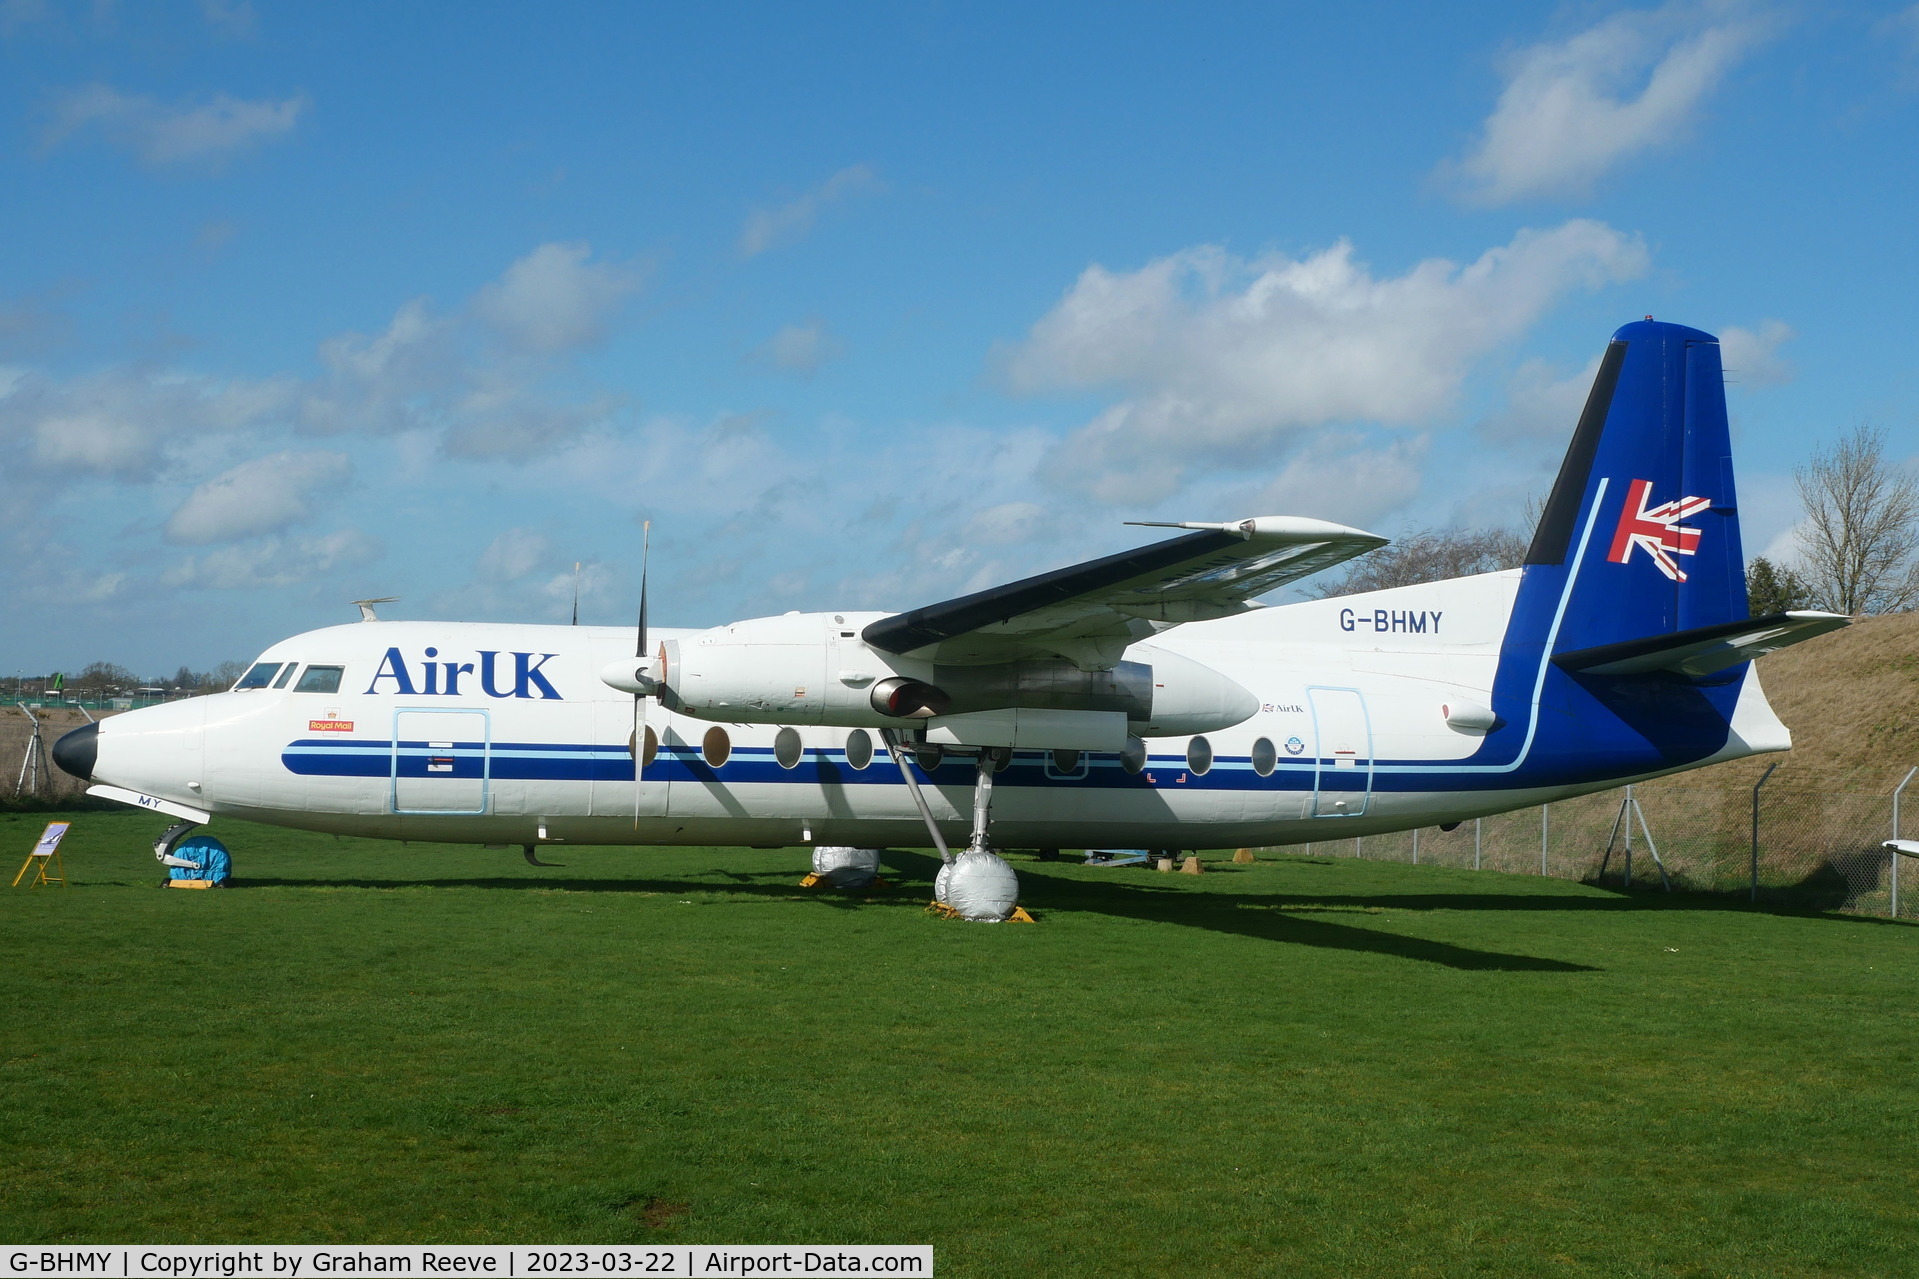 G-BHMY, 1962 Fokker F-27-200 Friendship C/N 10196, On display at the 